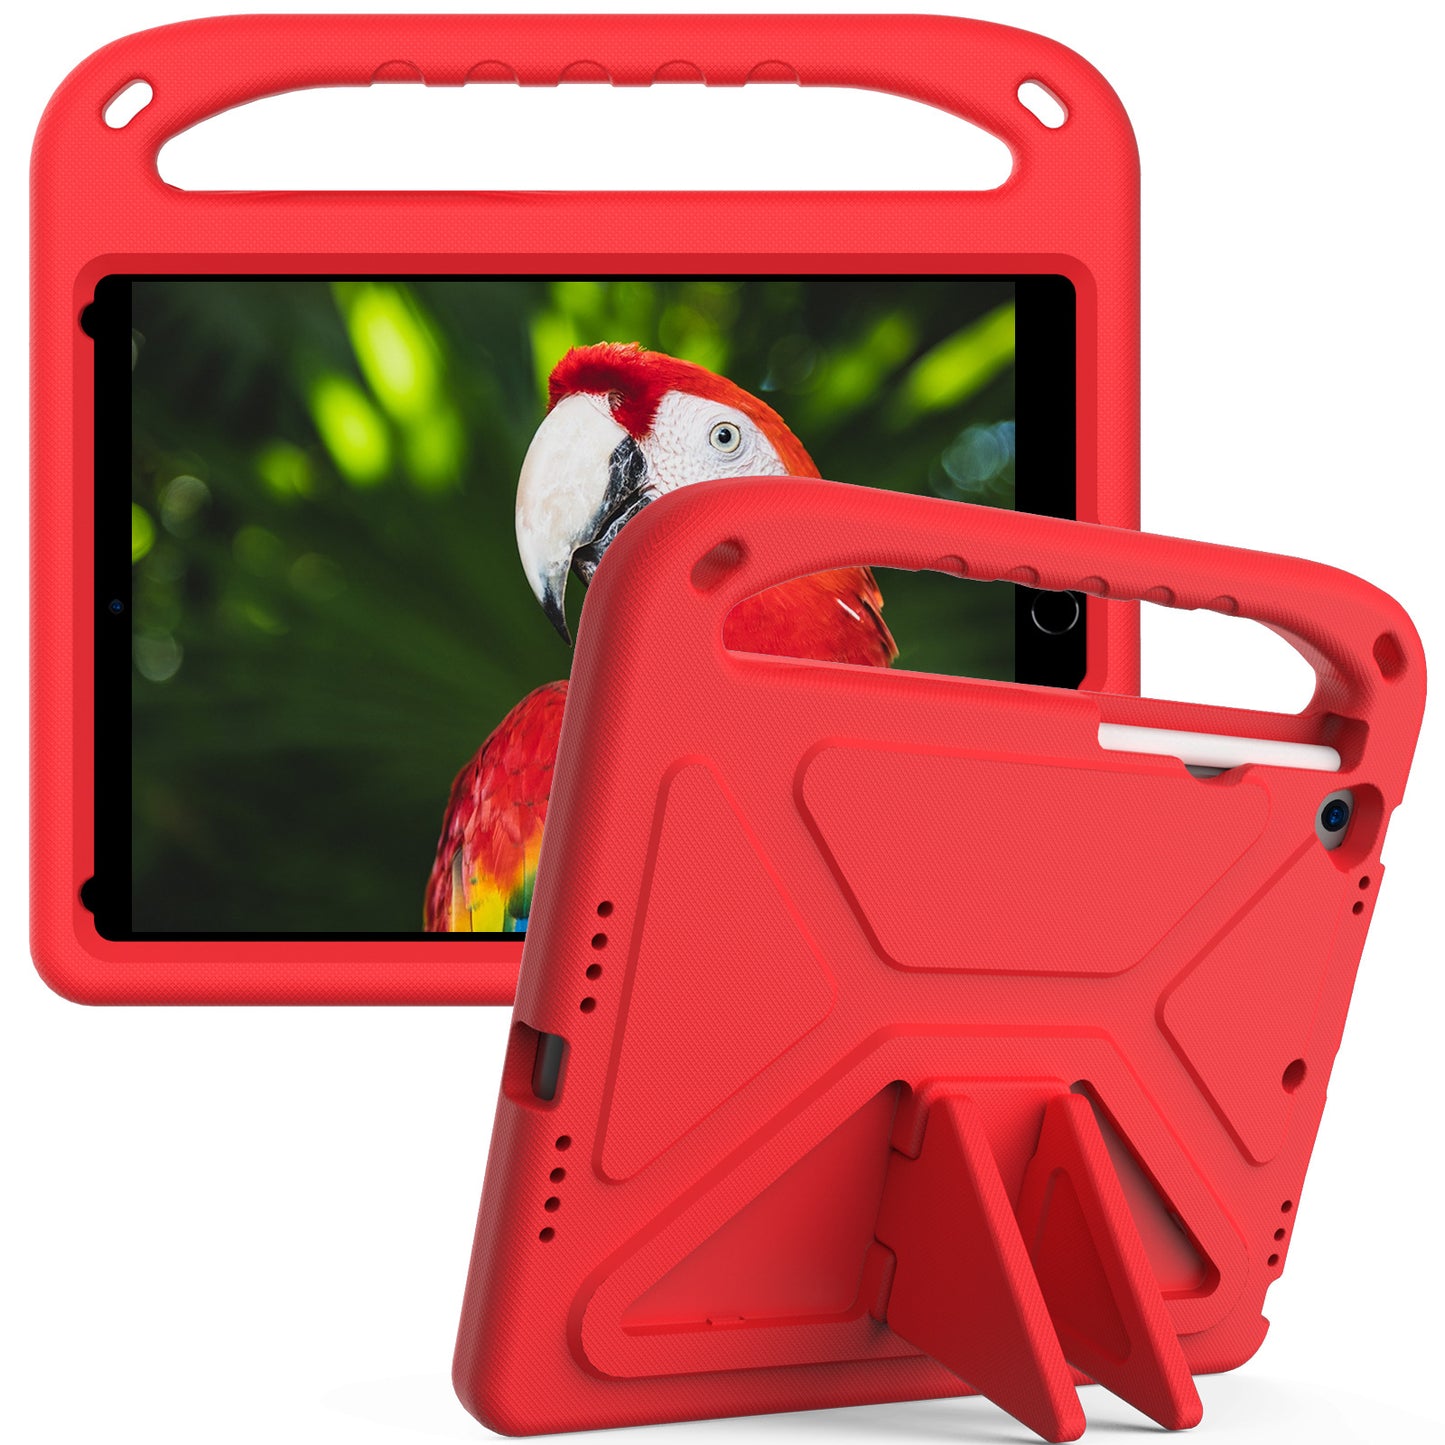 Anti-collision Simple Children's Tablet Protective Cover